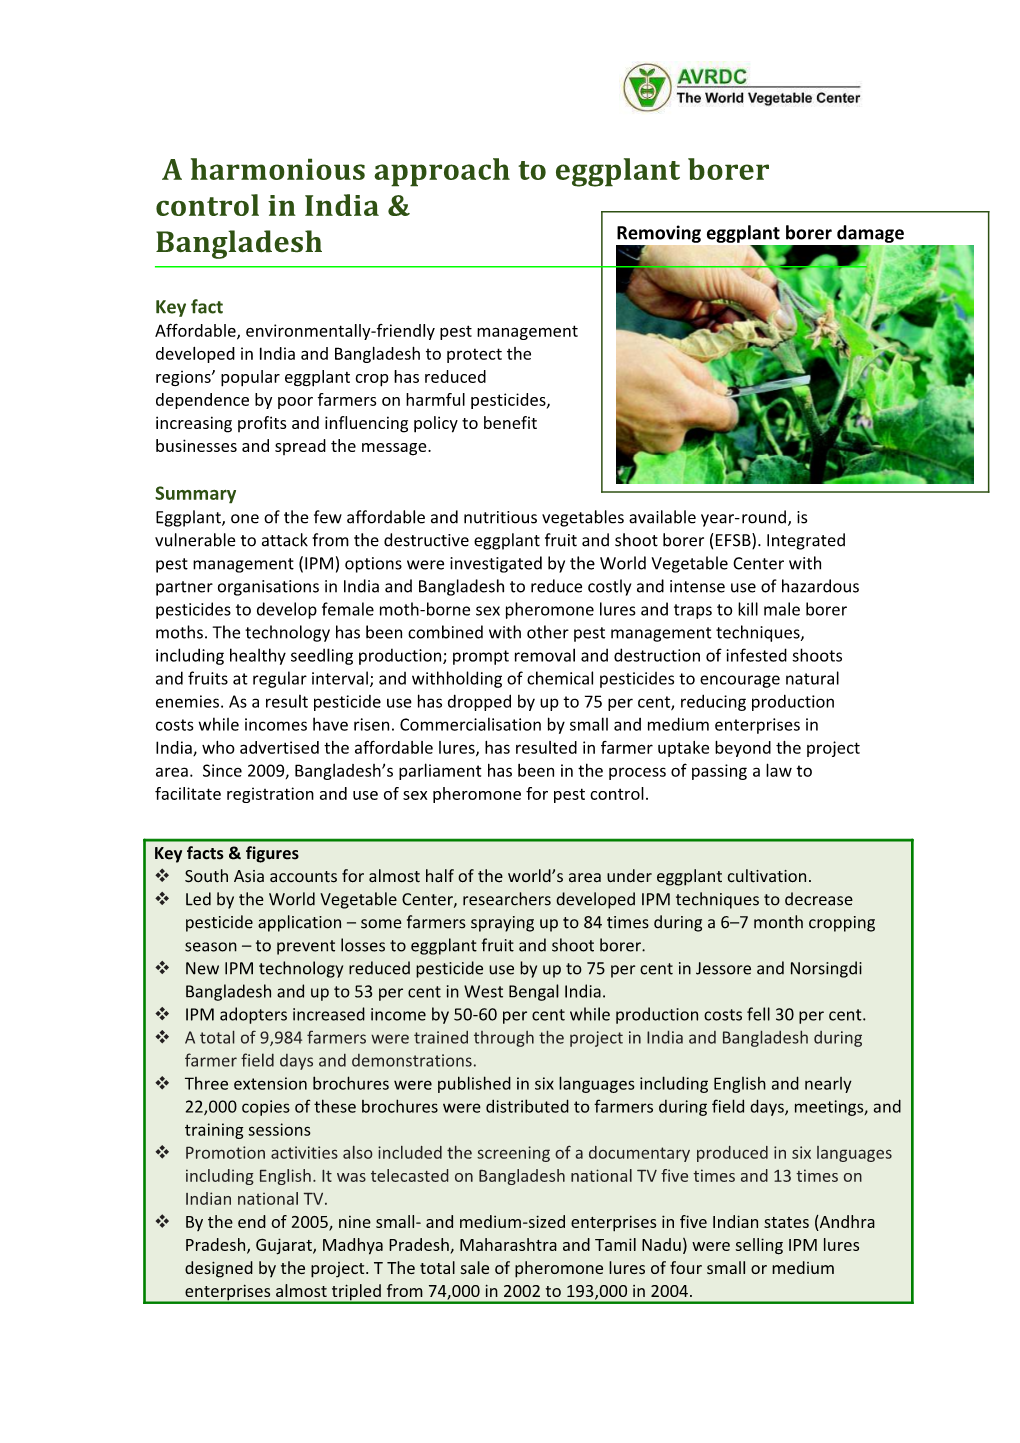 A Harmonious Approach to Eggplant Borer Control in India and Bangladesh